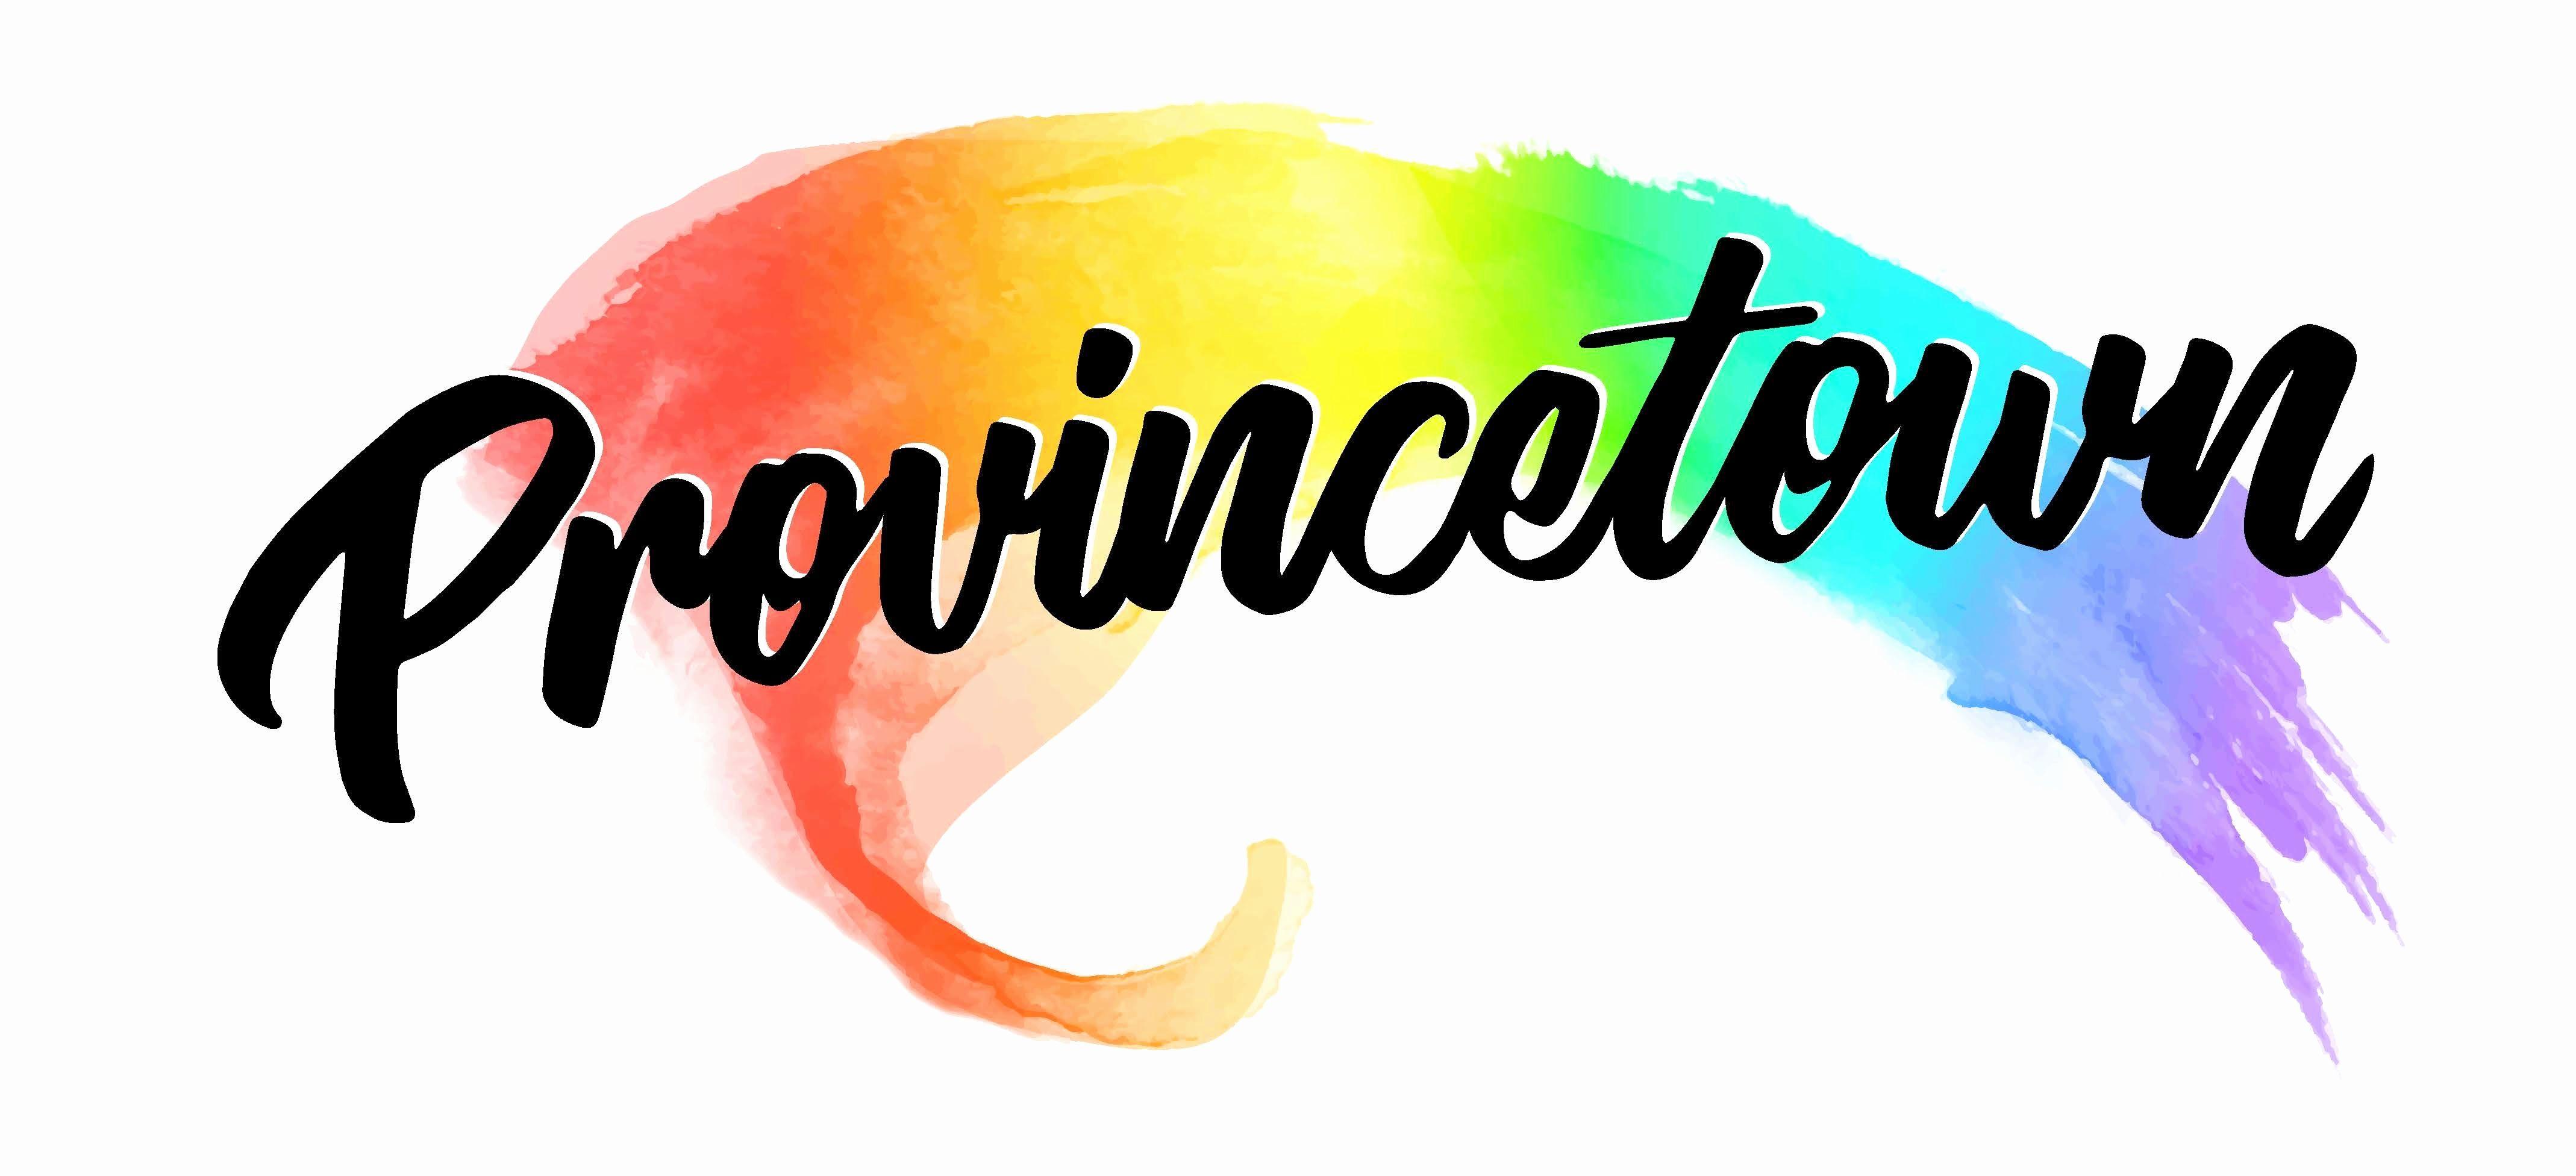 Rainbow Banner Logo - Provincetown Banner Wicked Local Best Of Rainbow Logo Seen as ...